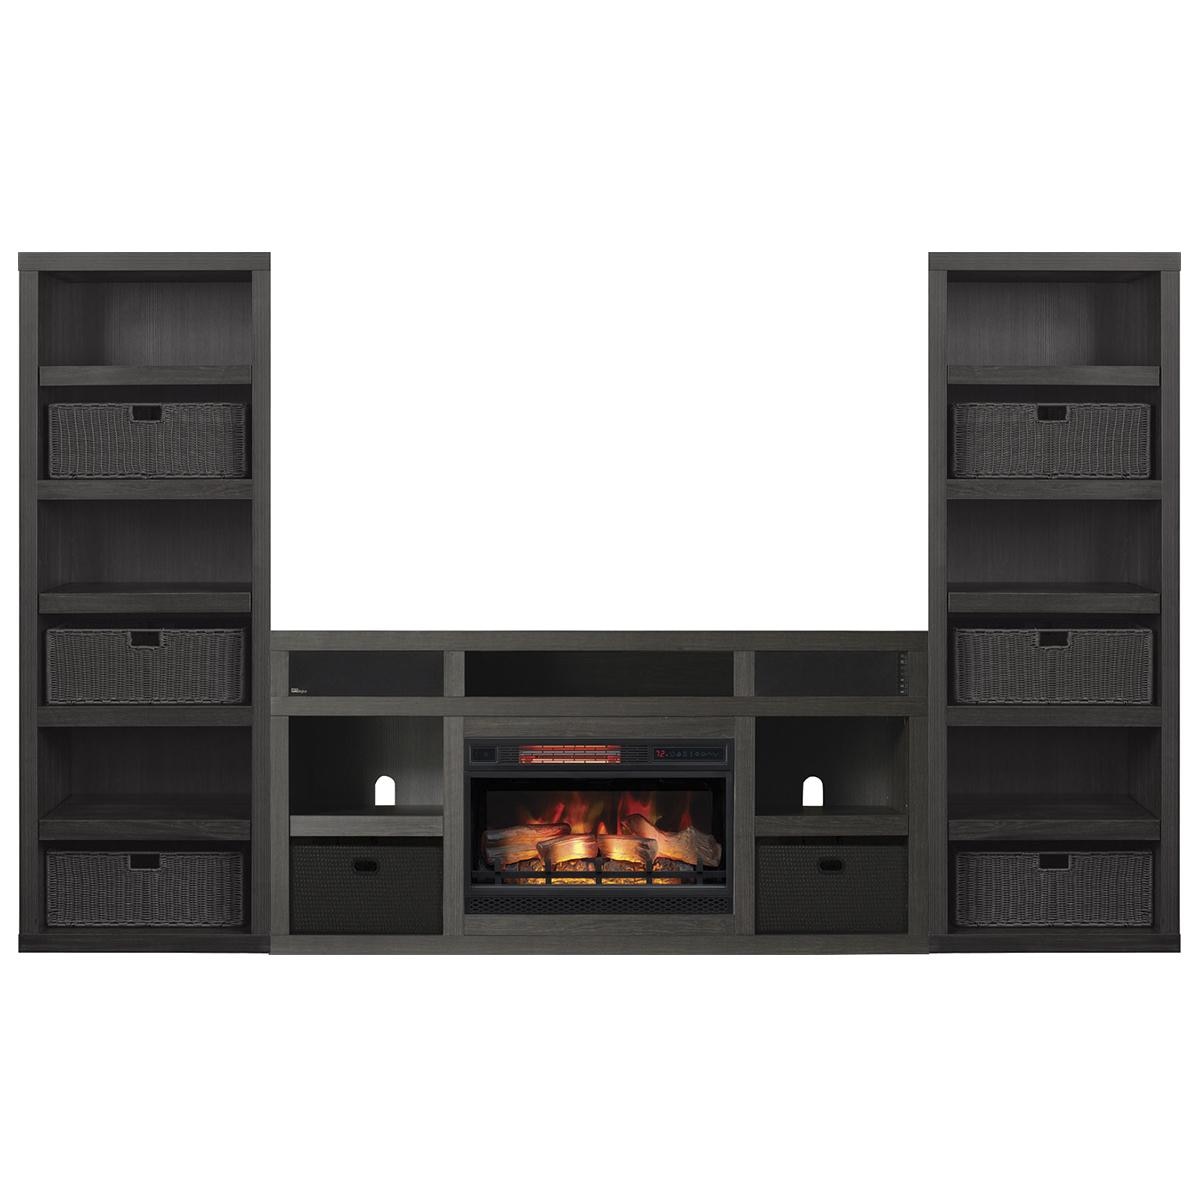 Tv Wall Unit with Electric Fireplace Unique Fabio Flames Greatlin 3 Piece Fireplace Entertainment Wall